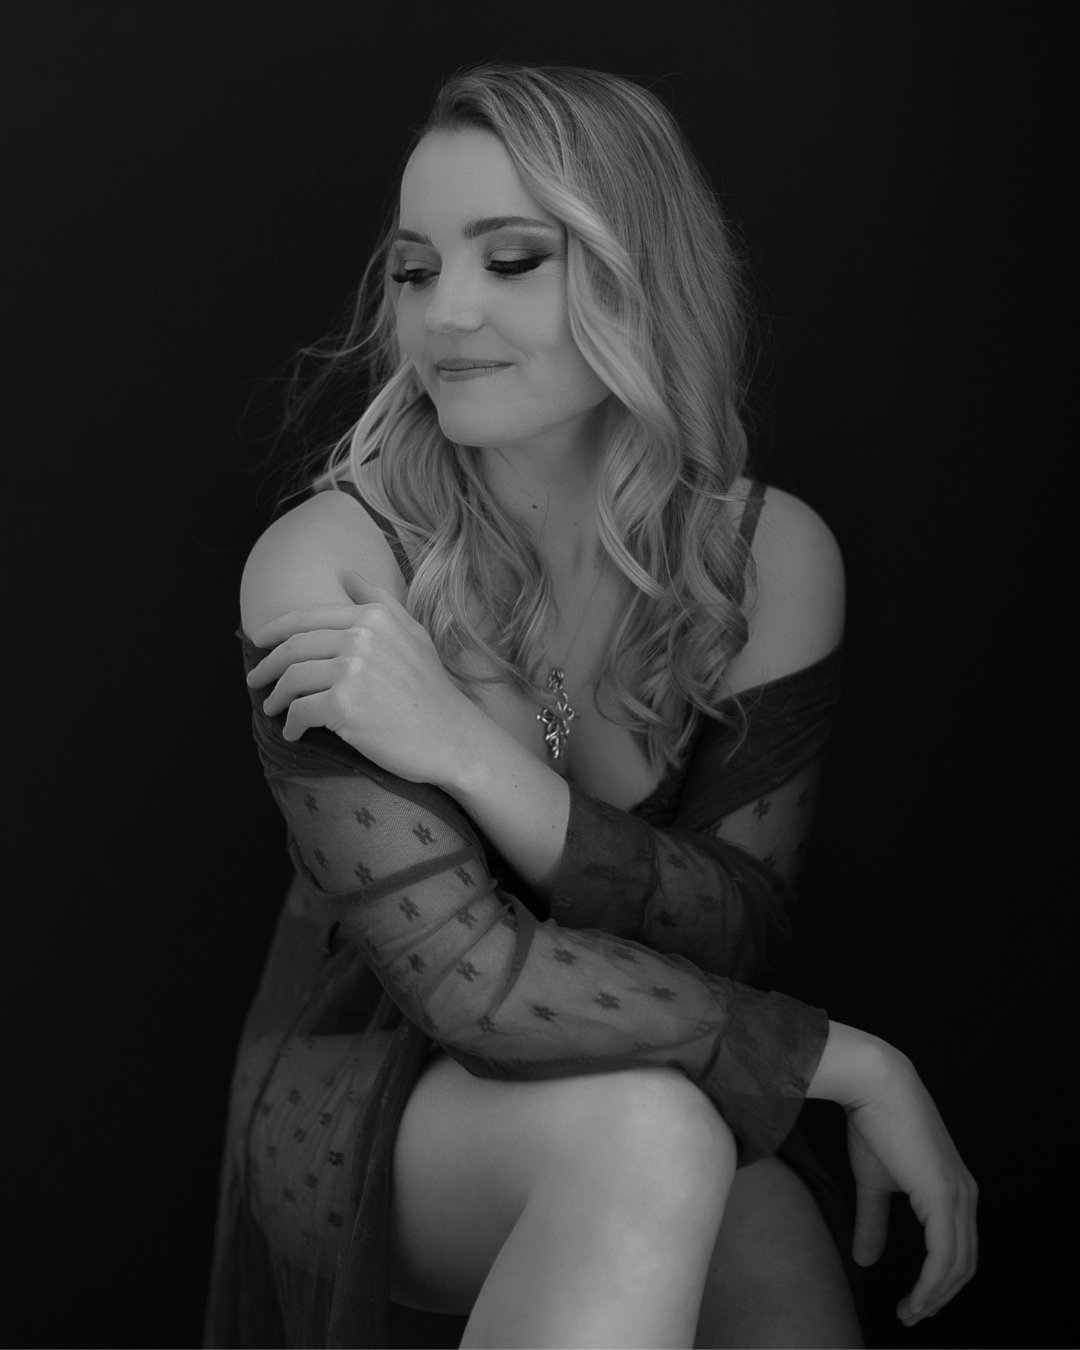 Want to feel sexier this Mother's Day?🔥

If all that goes with being a mom has you feeling like anything other than the beautiful, sexy, independent woman you are, a boudoir photo shoot is a great way to remind yourself what an amazing human you are